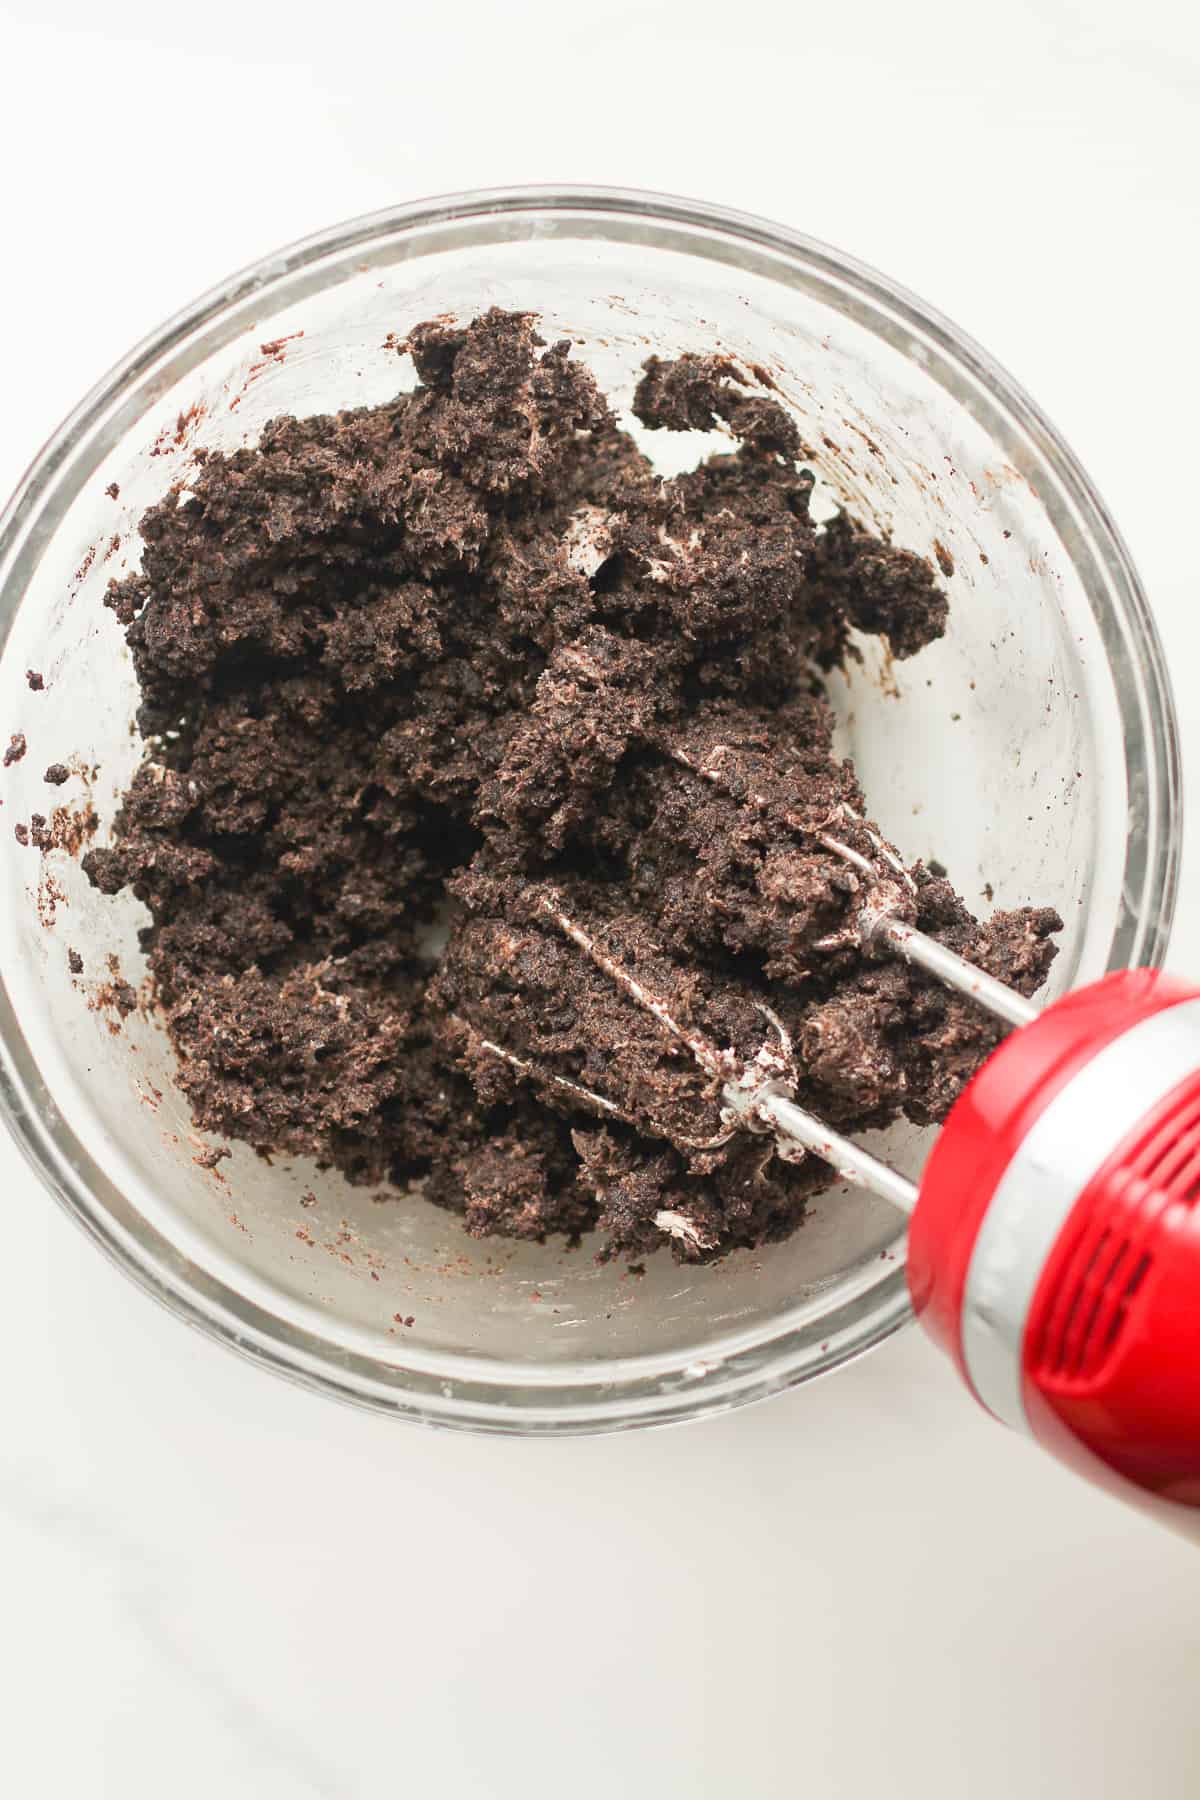 The Oreo mixture after blending.